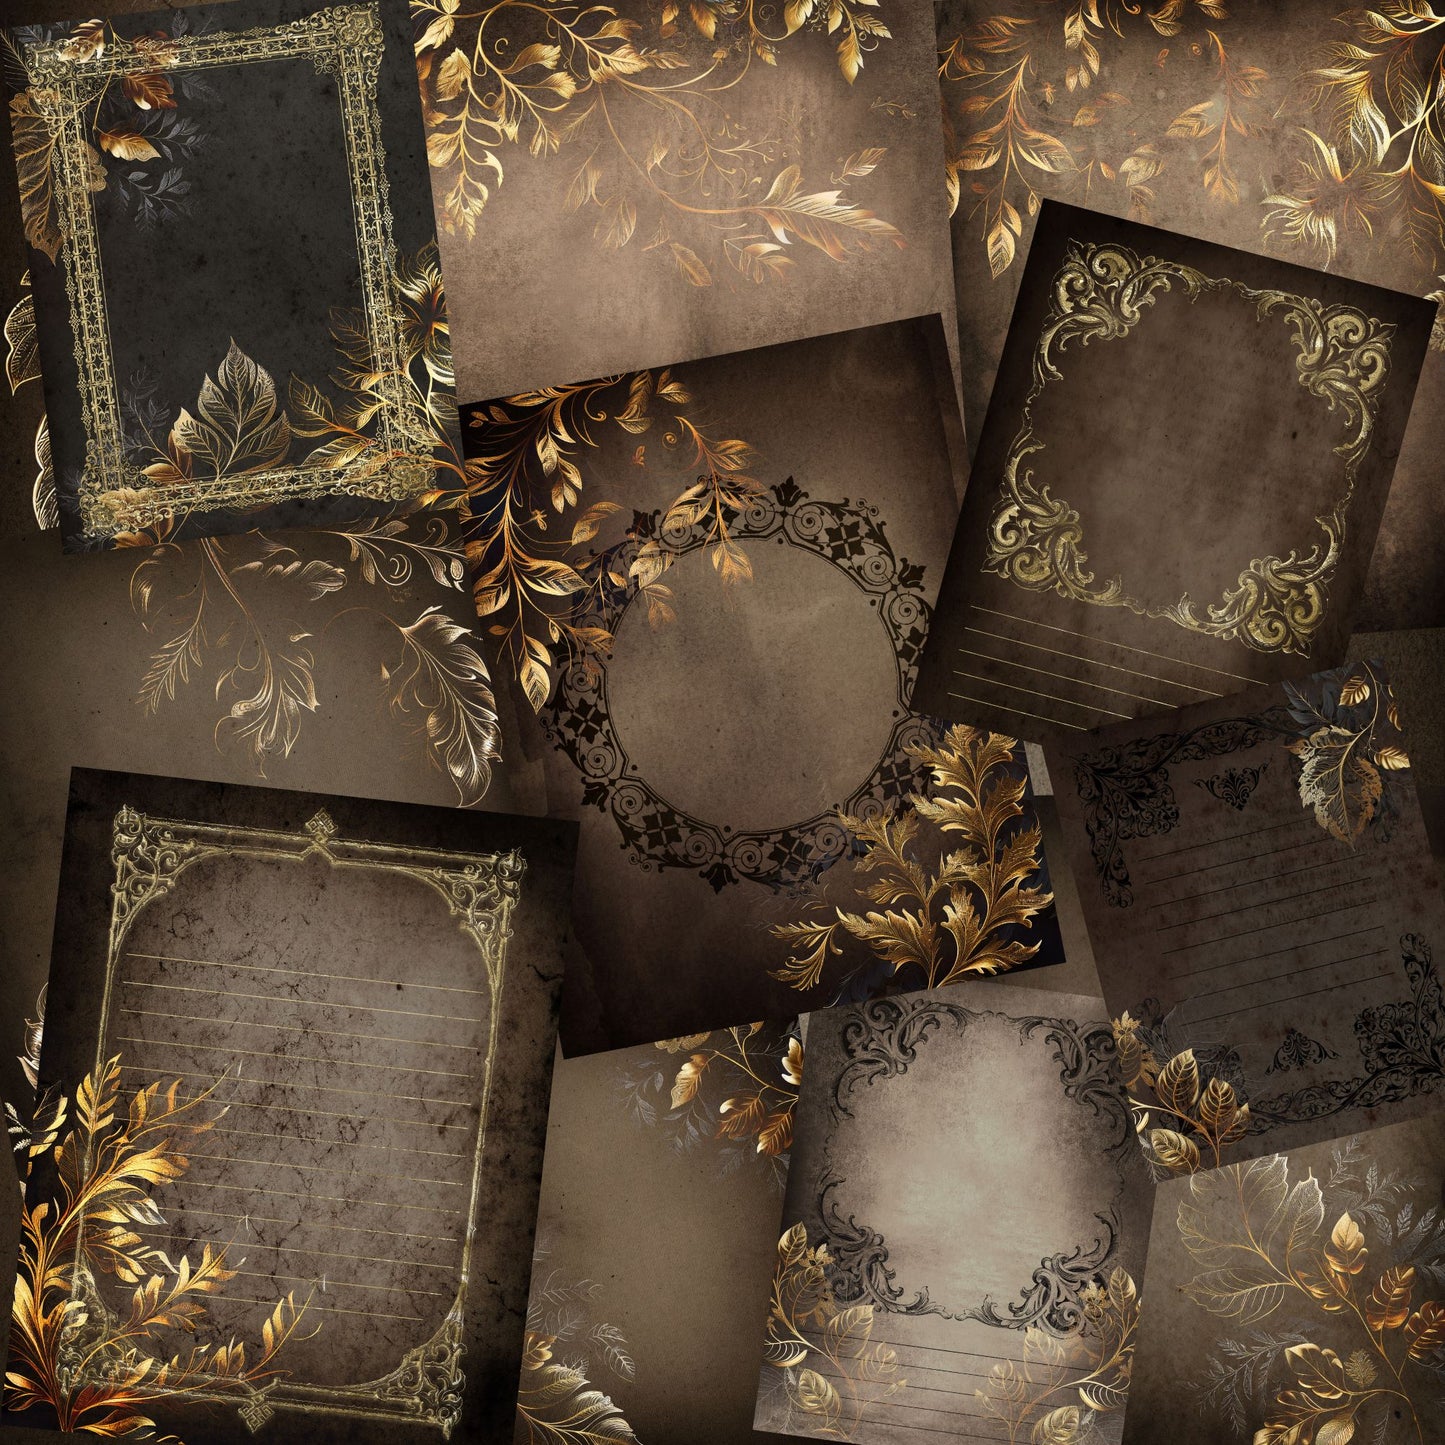 Ornate Gold Journal Pages - 23-7214